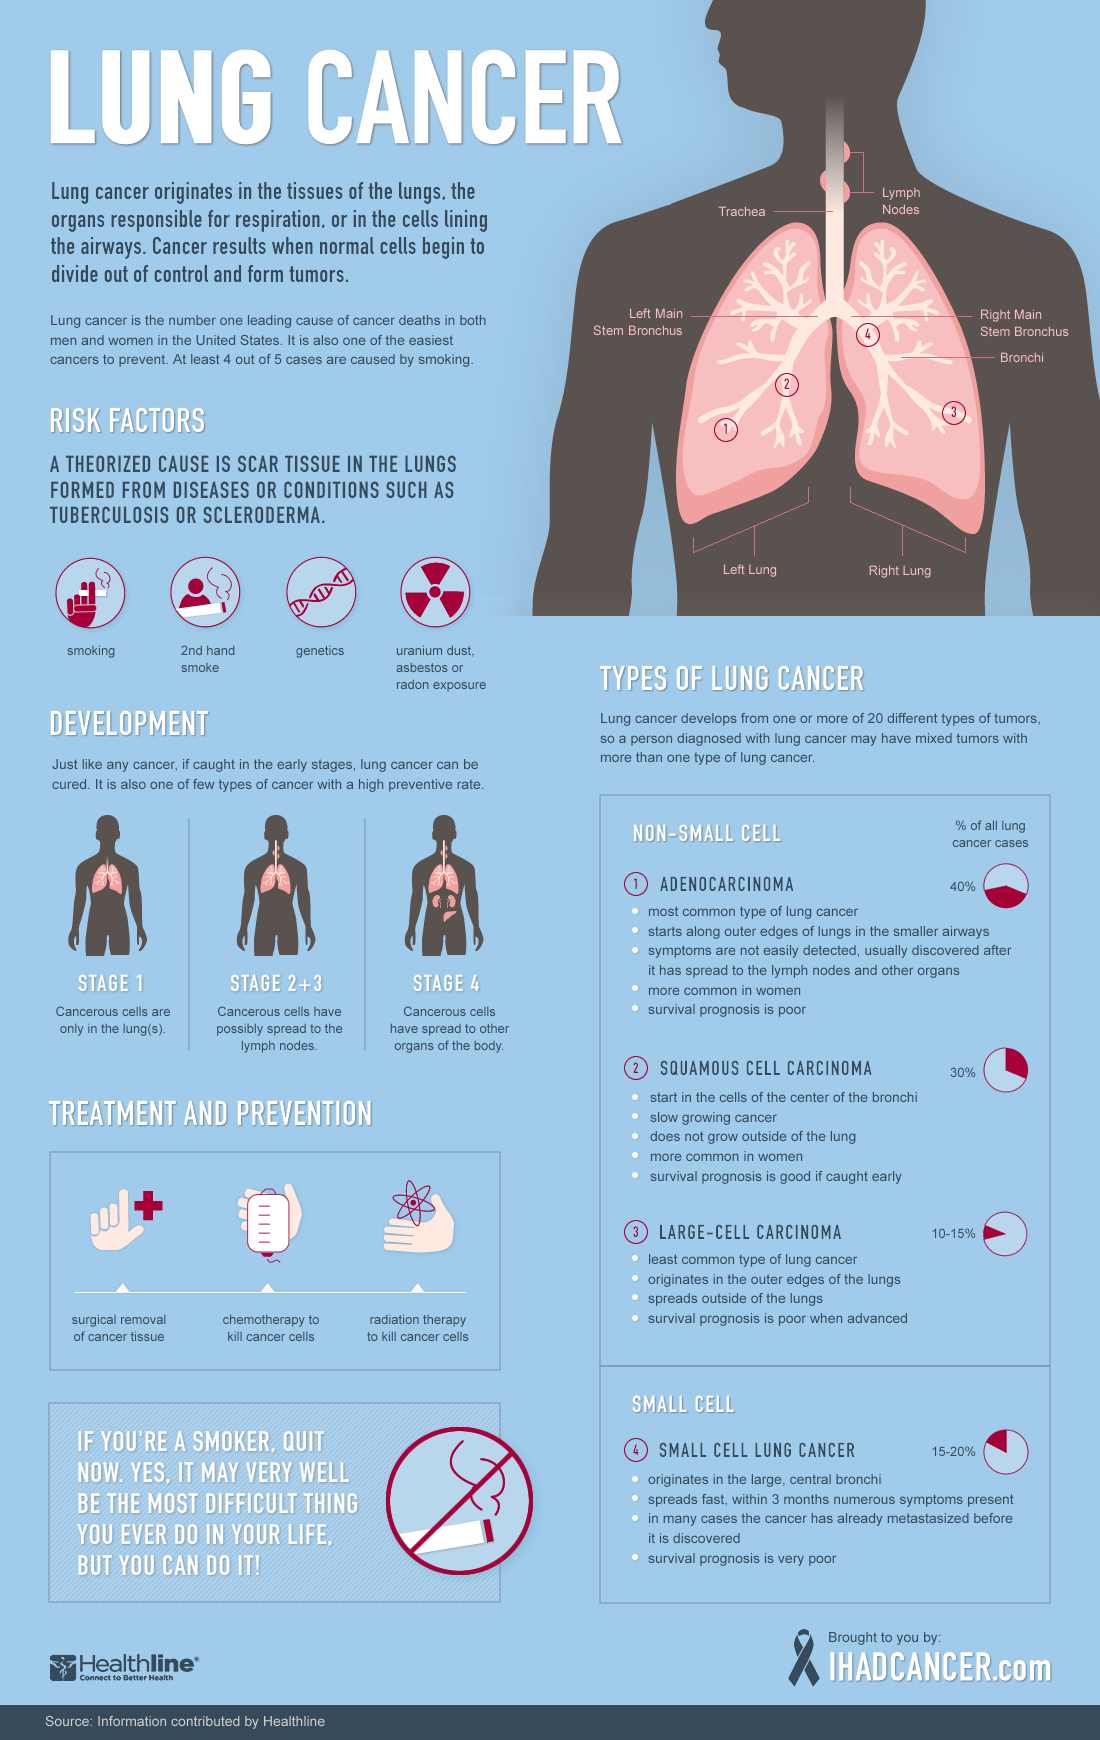 Lung Cancer: A Visual Guide